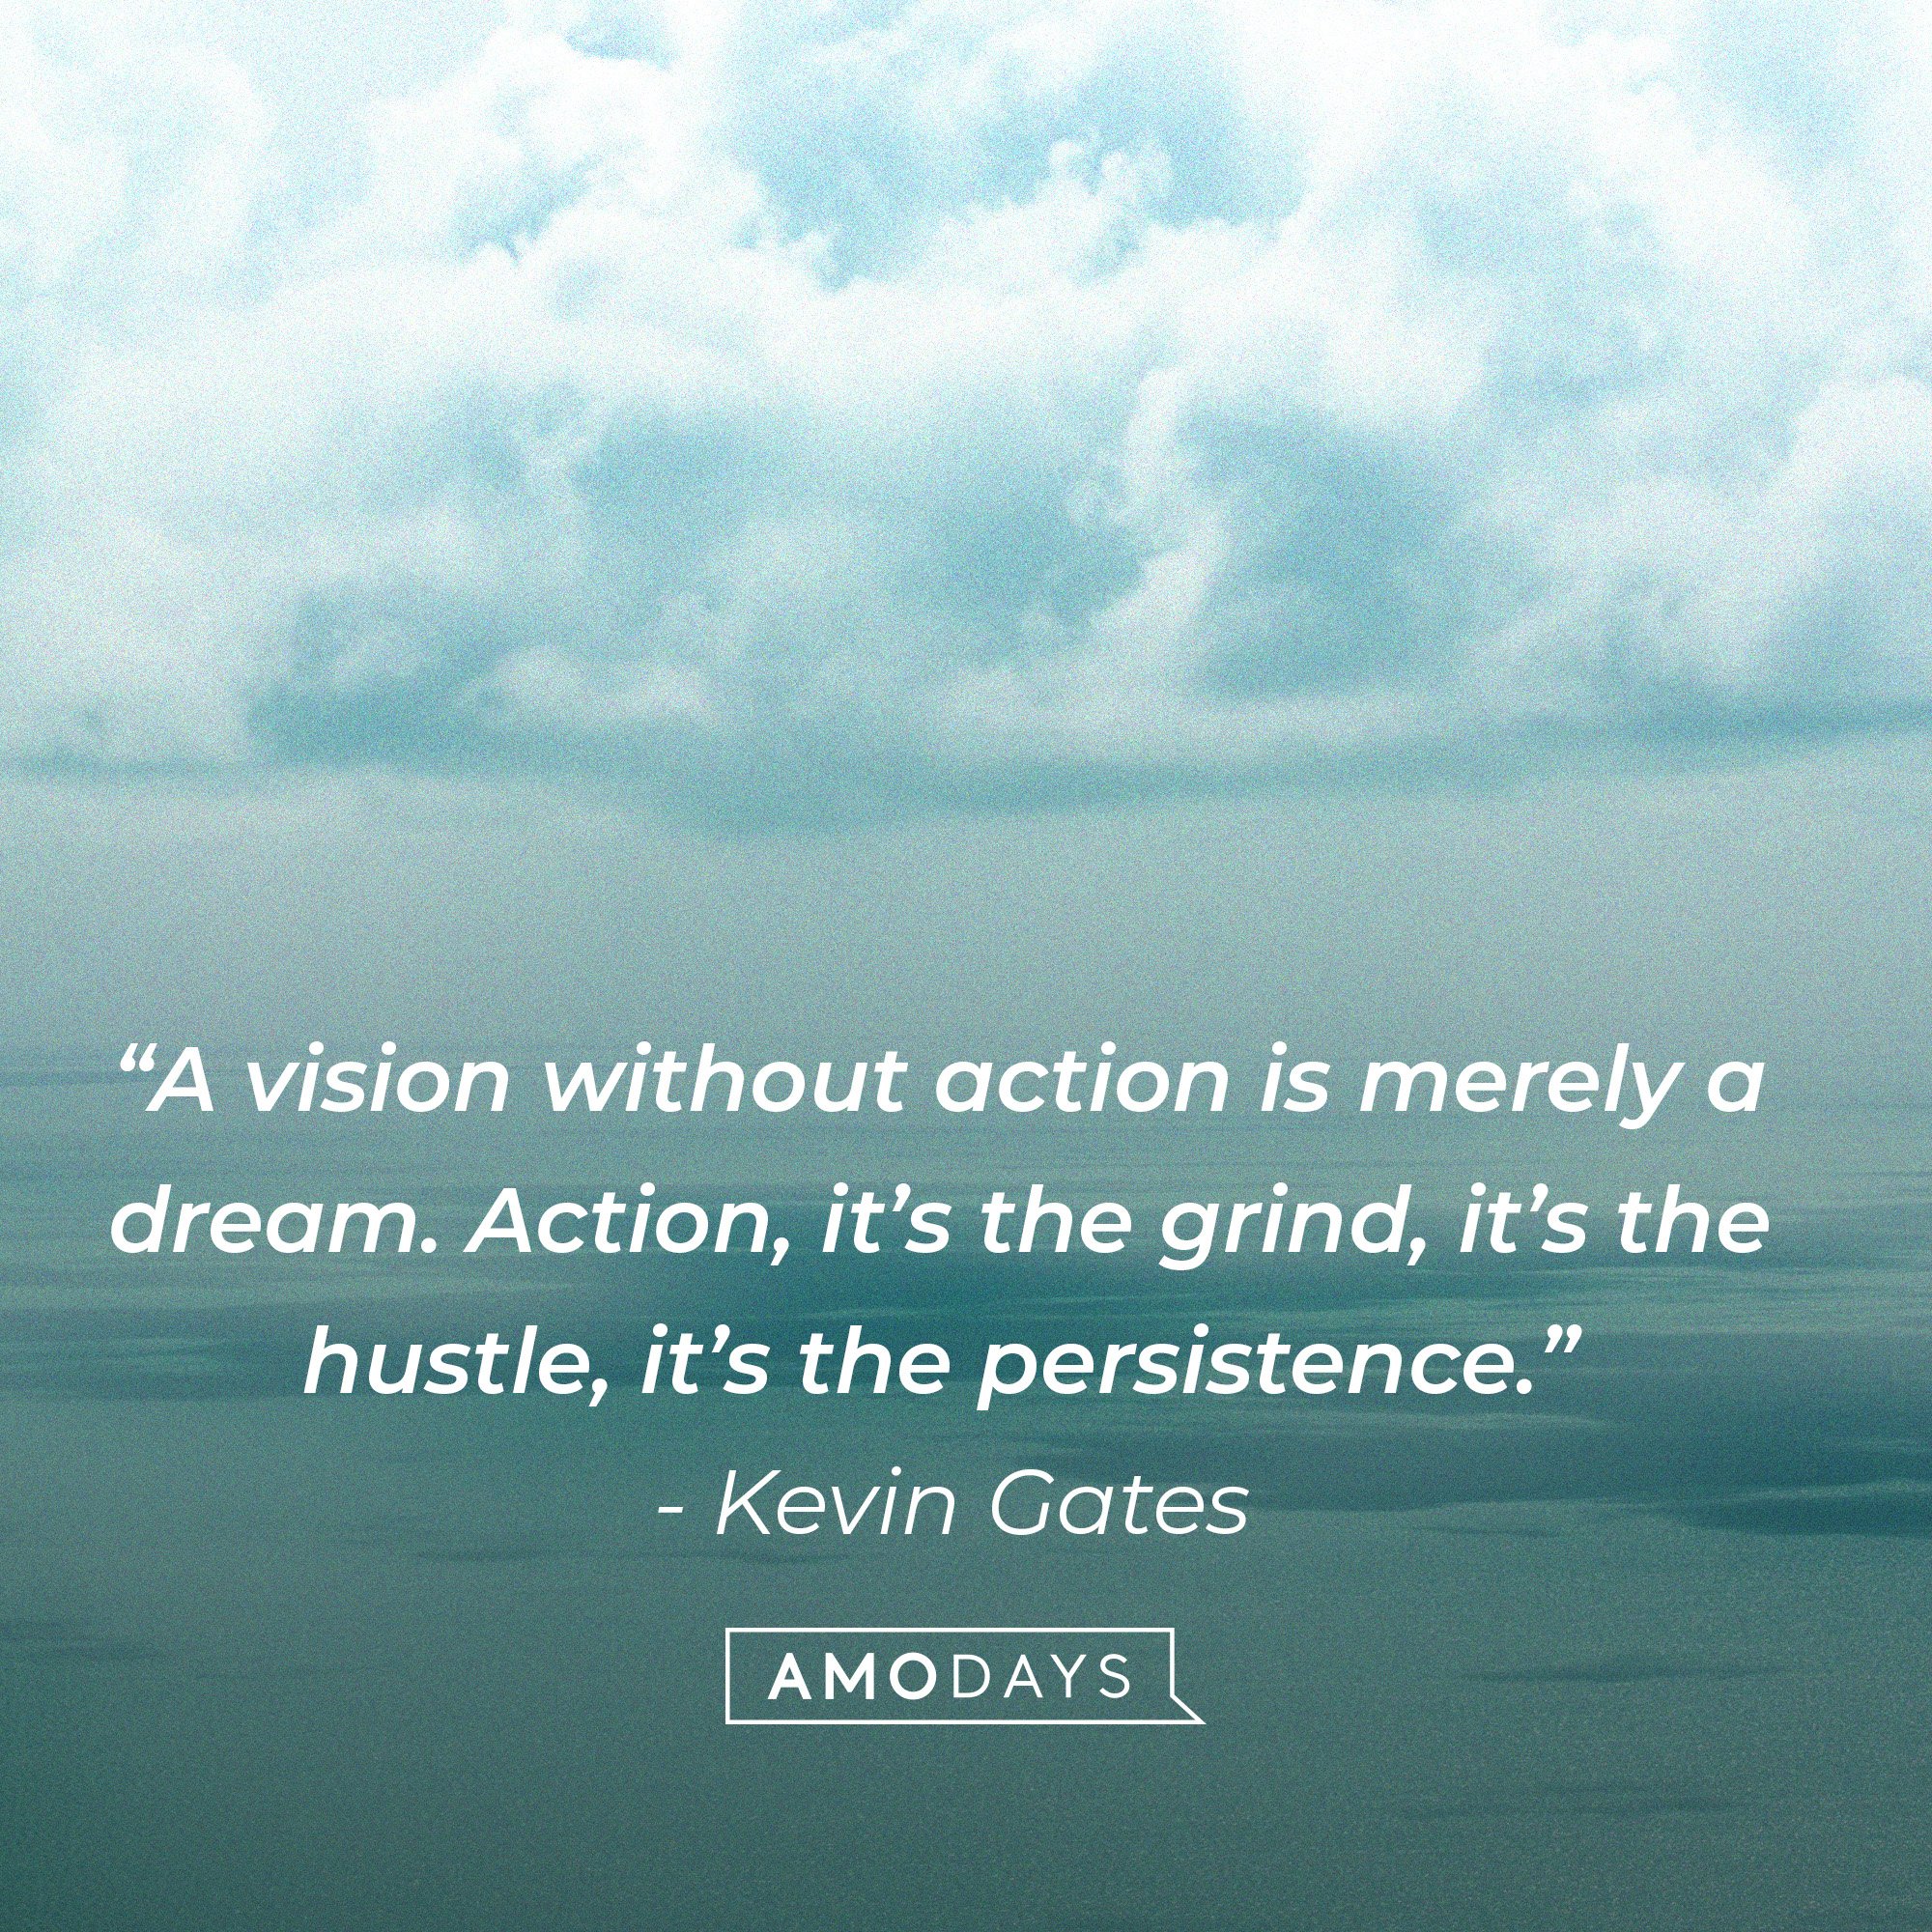 Kevin Gates’ quote: "A vision without action is merely a dream. Action, it’s the grind, it’s the hustle, it’s the persistence.” | Image: AmoDays